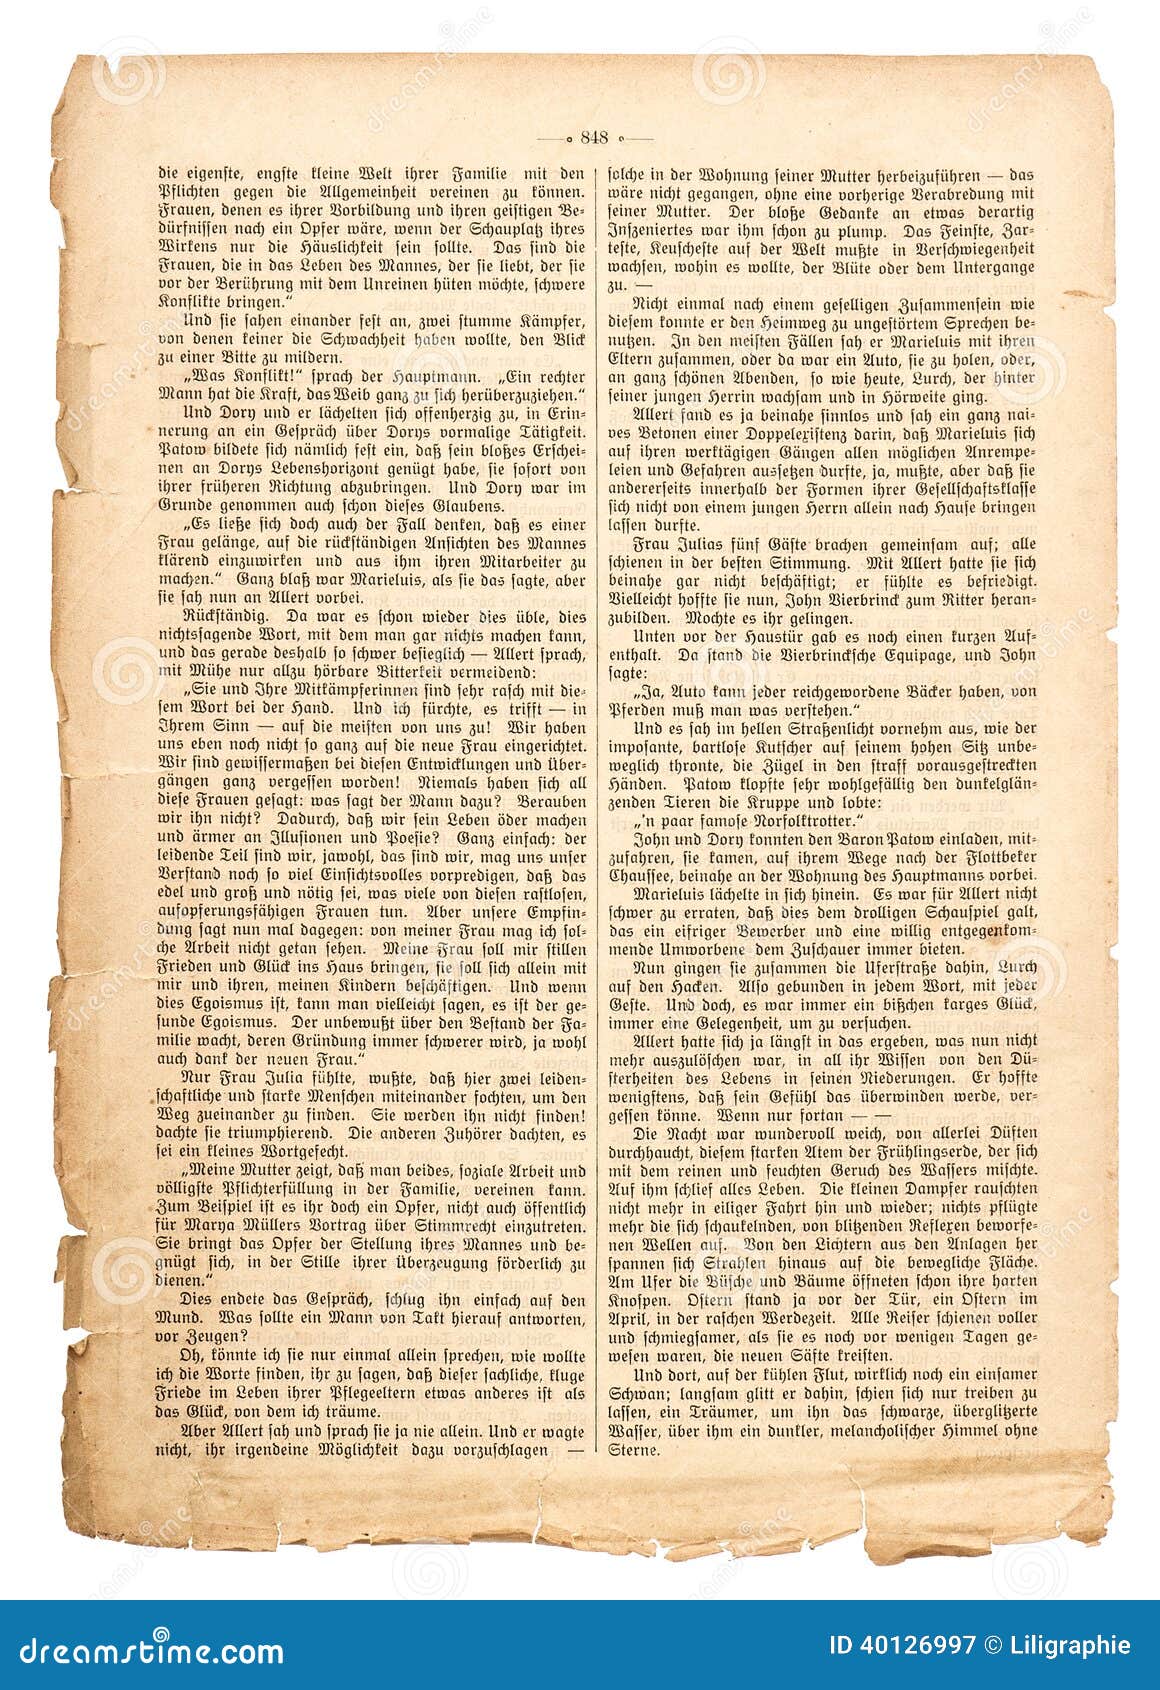 grunge page of undefined antique book with german text